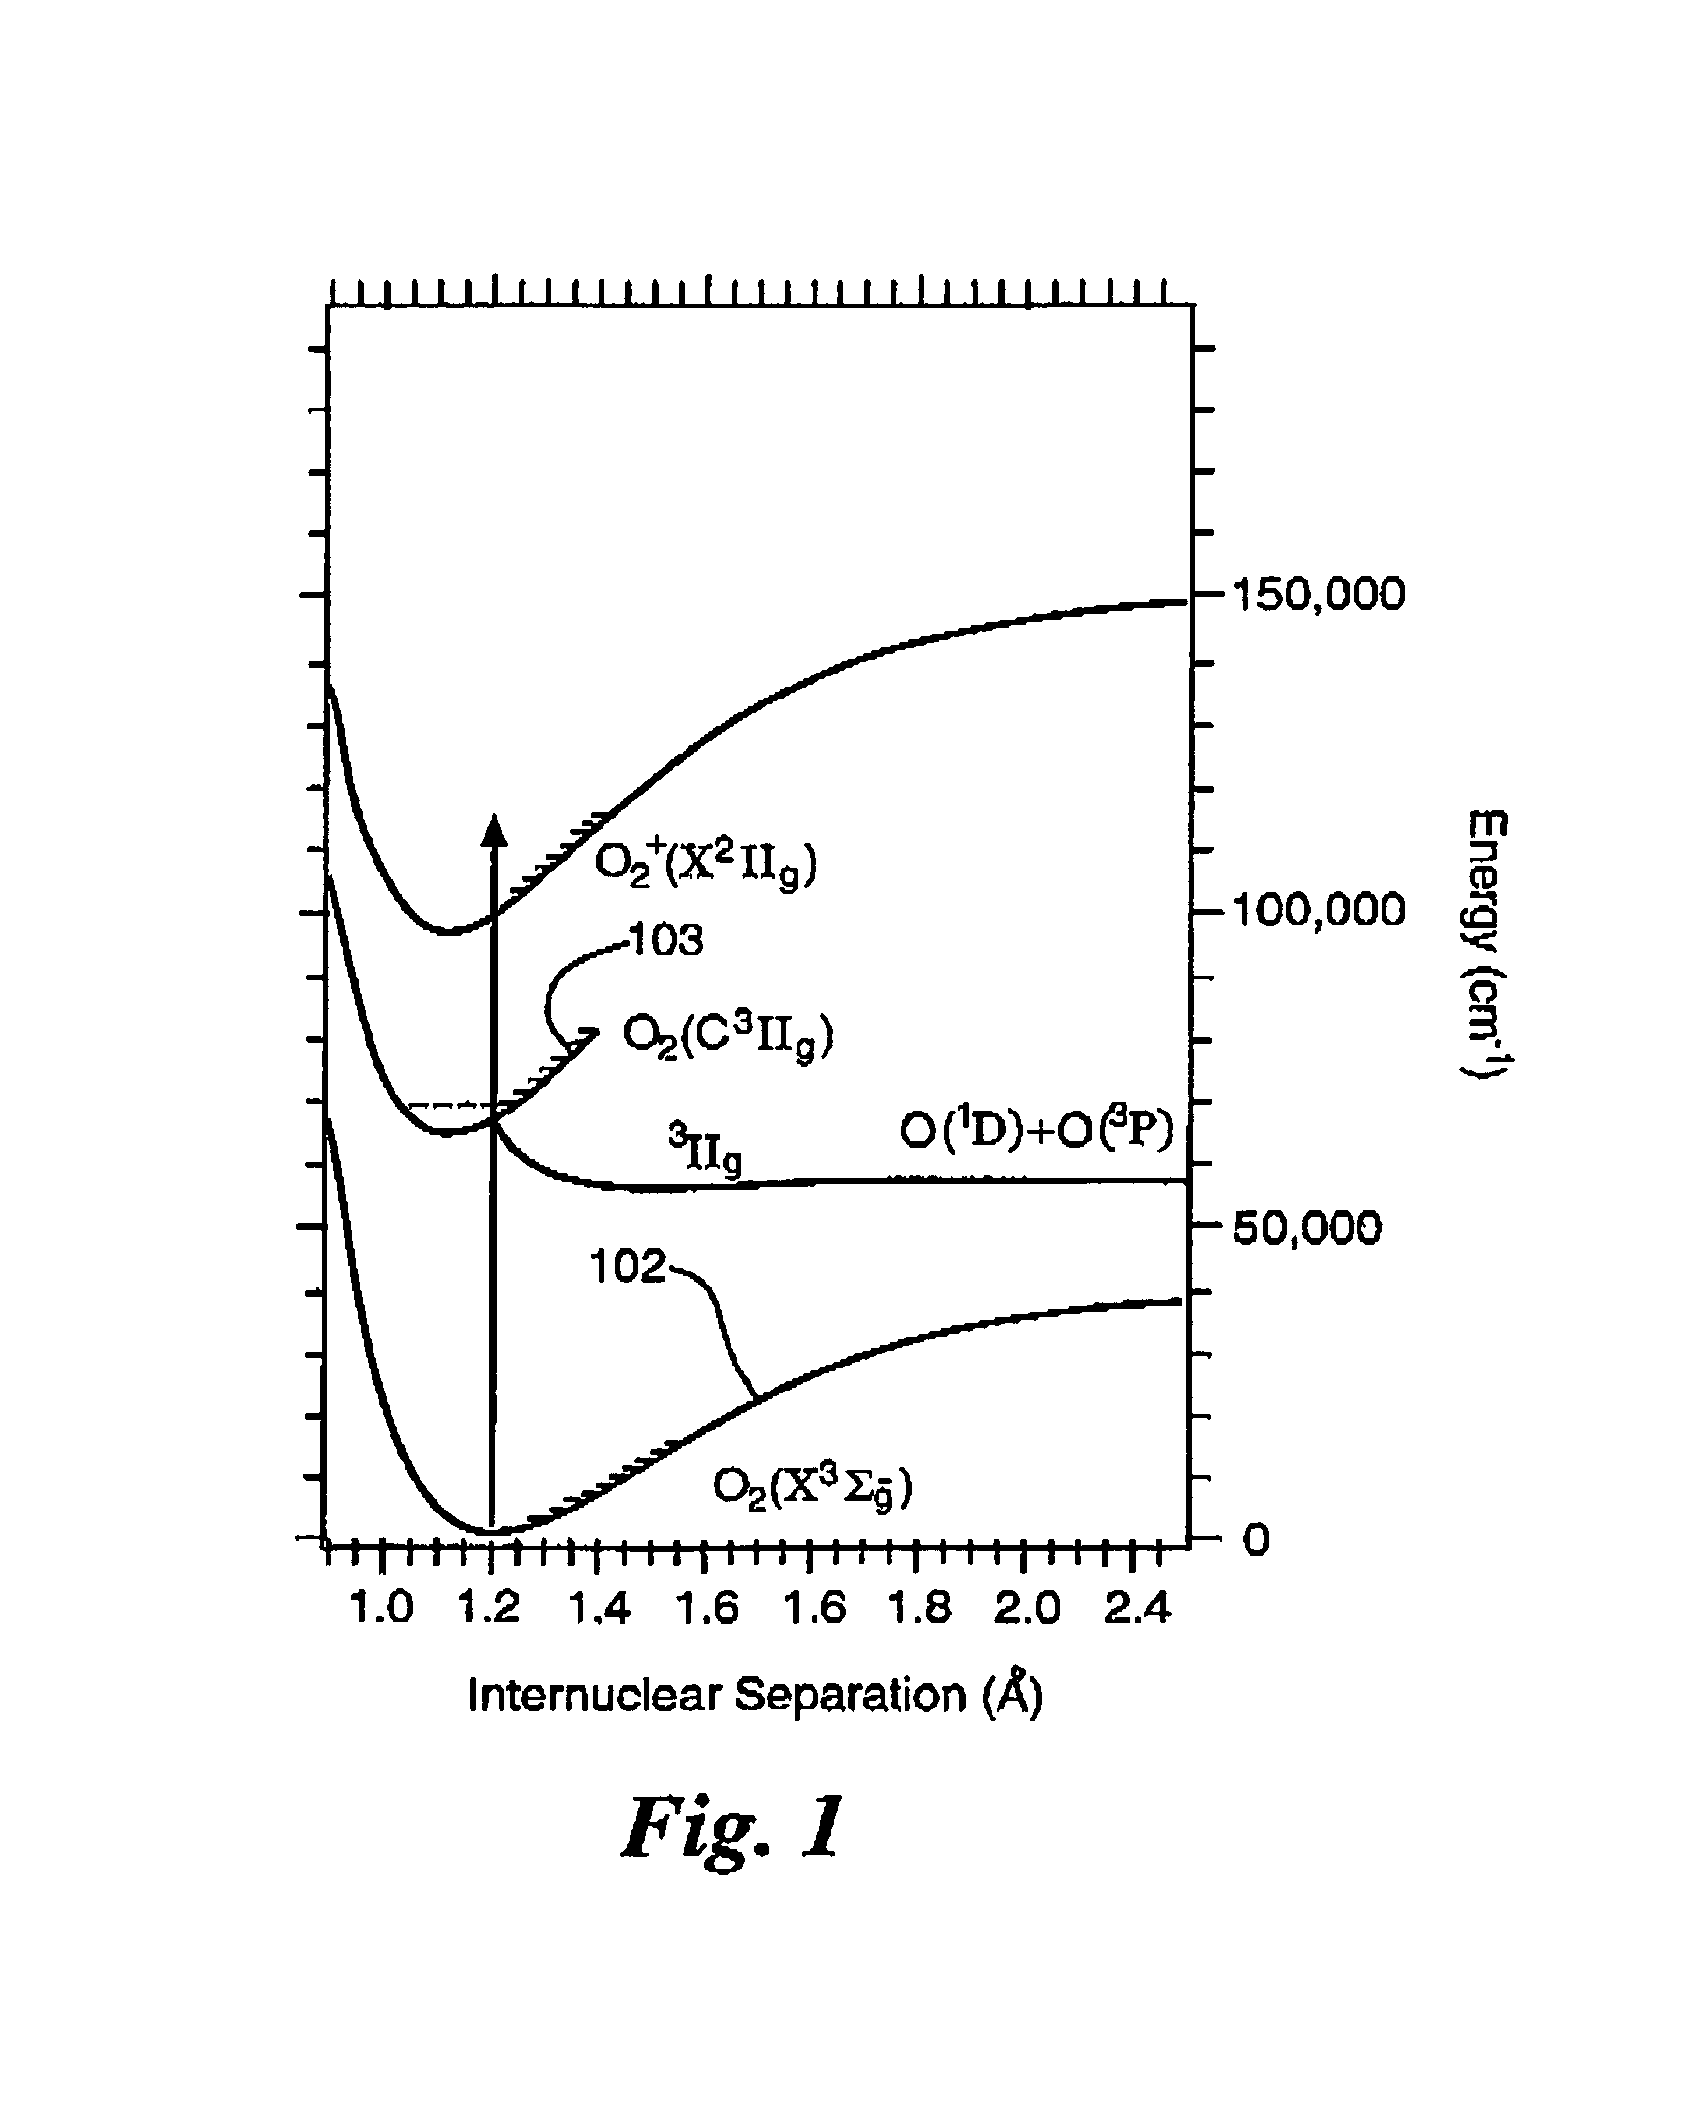 Low energy laser-induced ignition of an air-fuel mixture